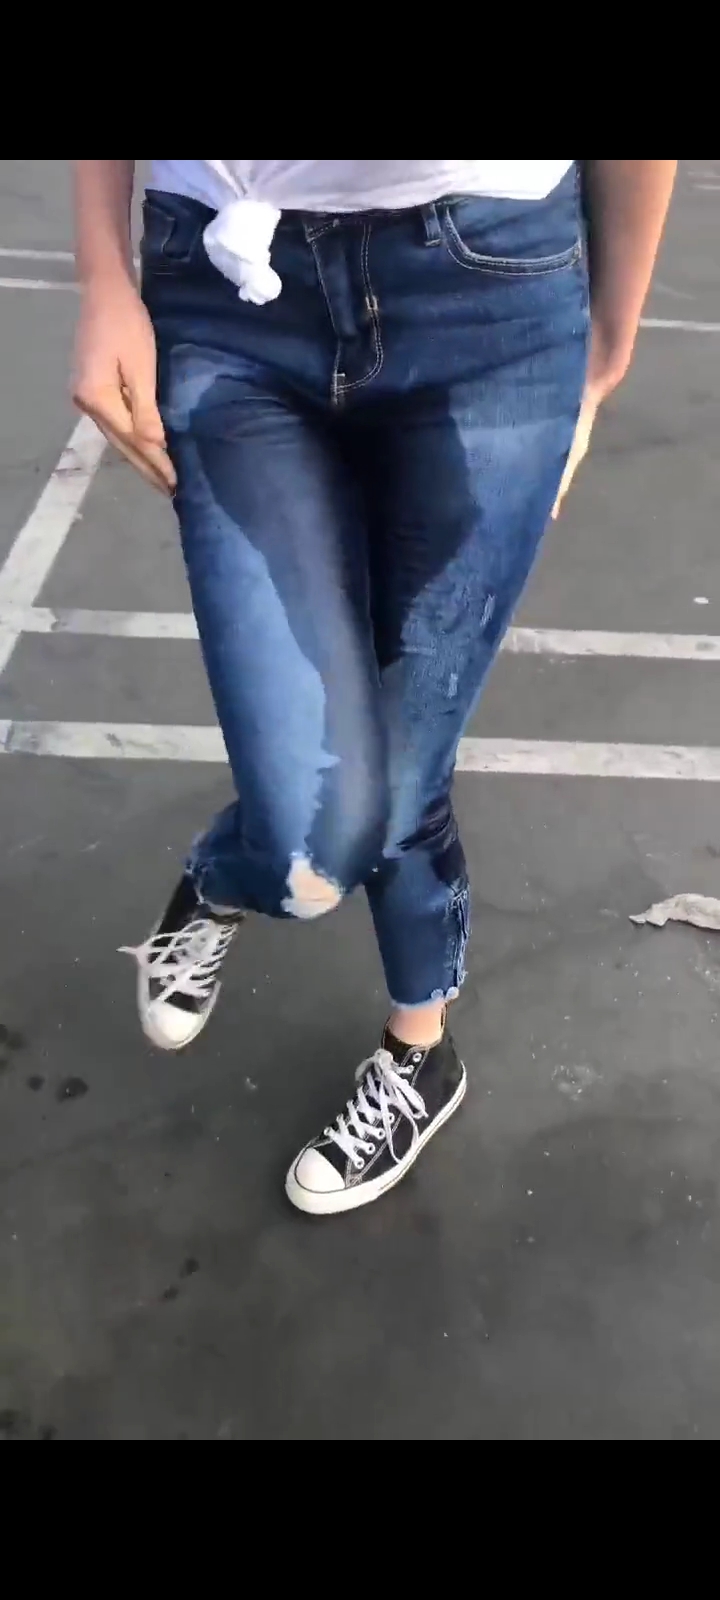 Pee jeans at parking lot